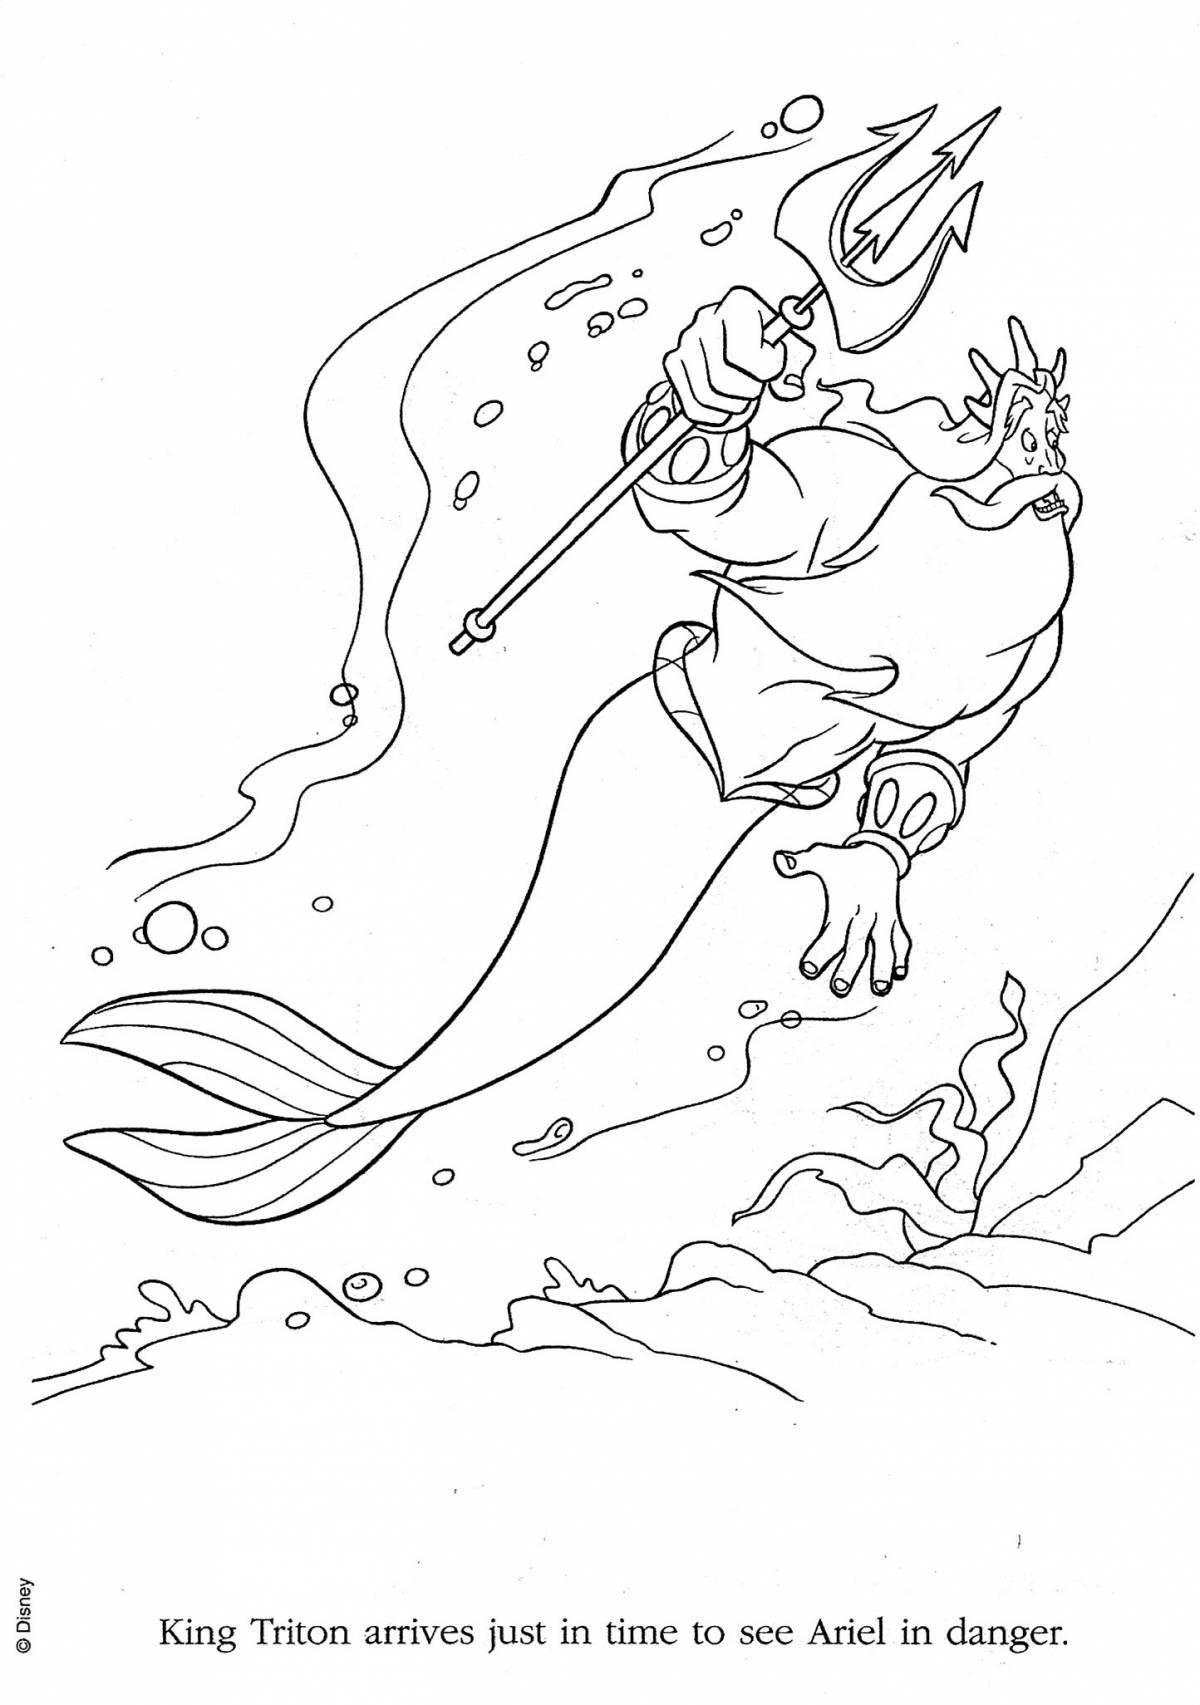 Charming neptune coloring book